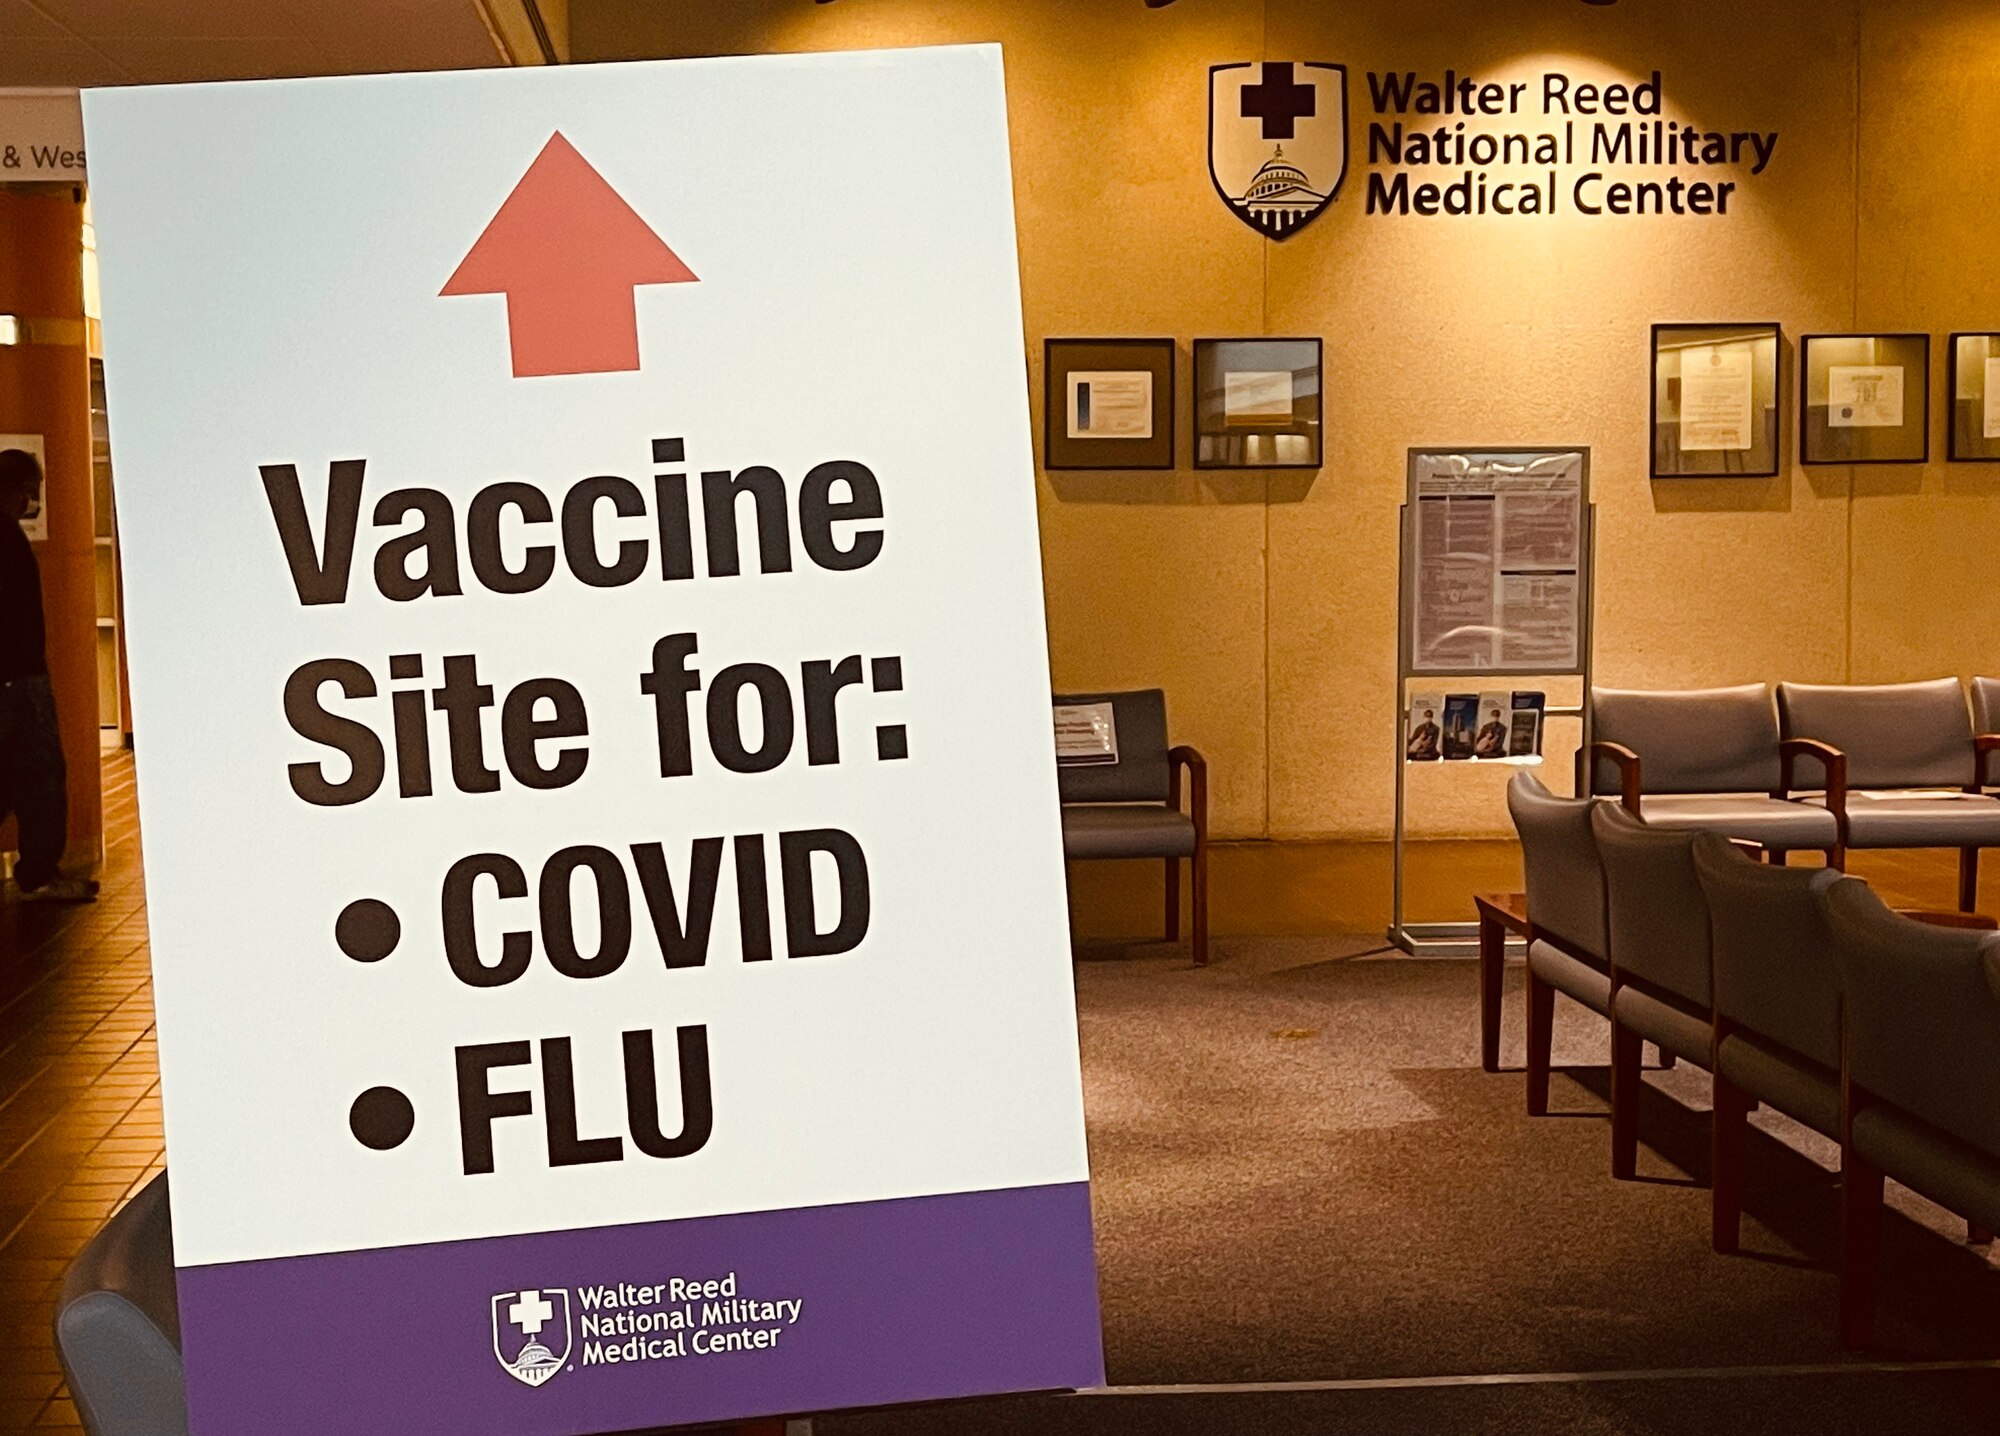 COVID-19 vaccination sign stands in Walter Reed National Military Medical Center, Bethesda, Maryland, Dec. 21, 2021. The sign reminds patients of areas to get their COVID-19 vaccine in the hospital.